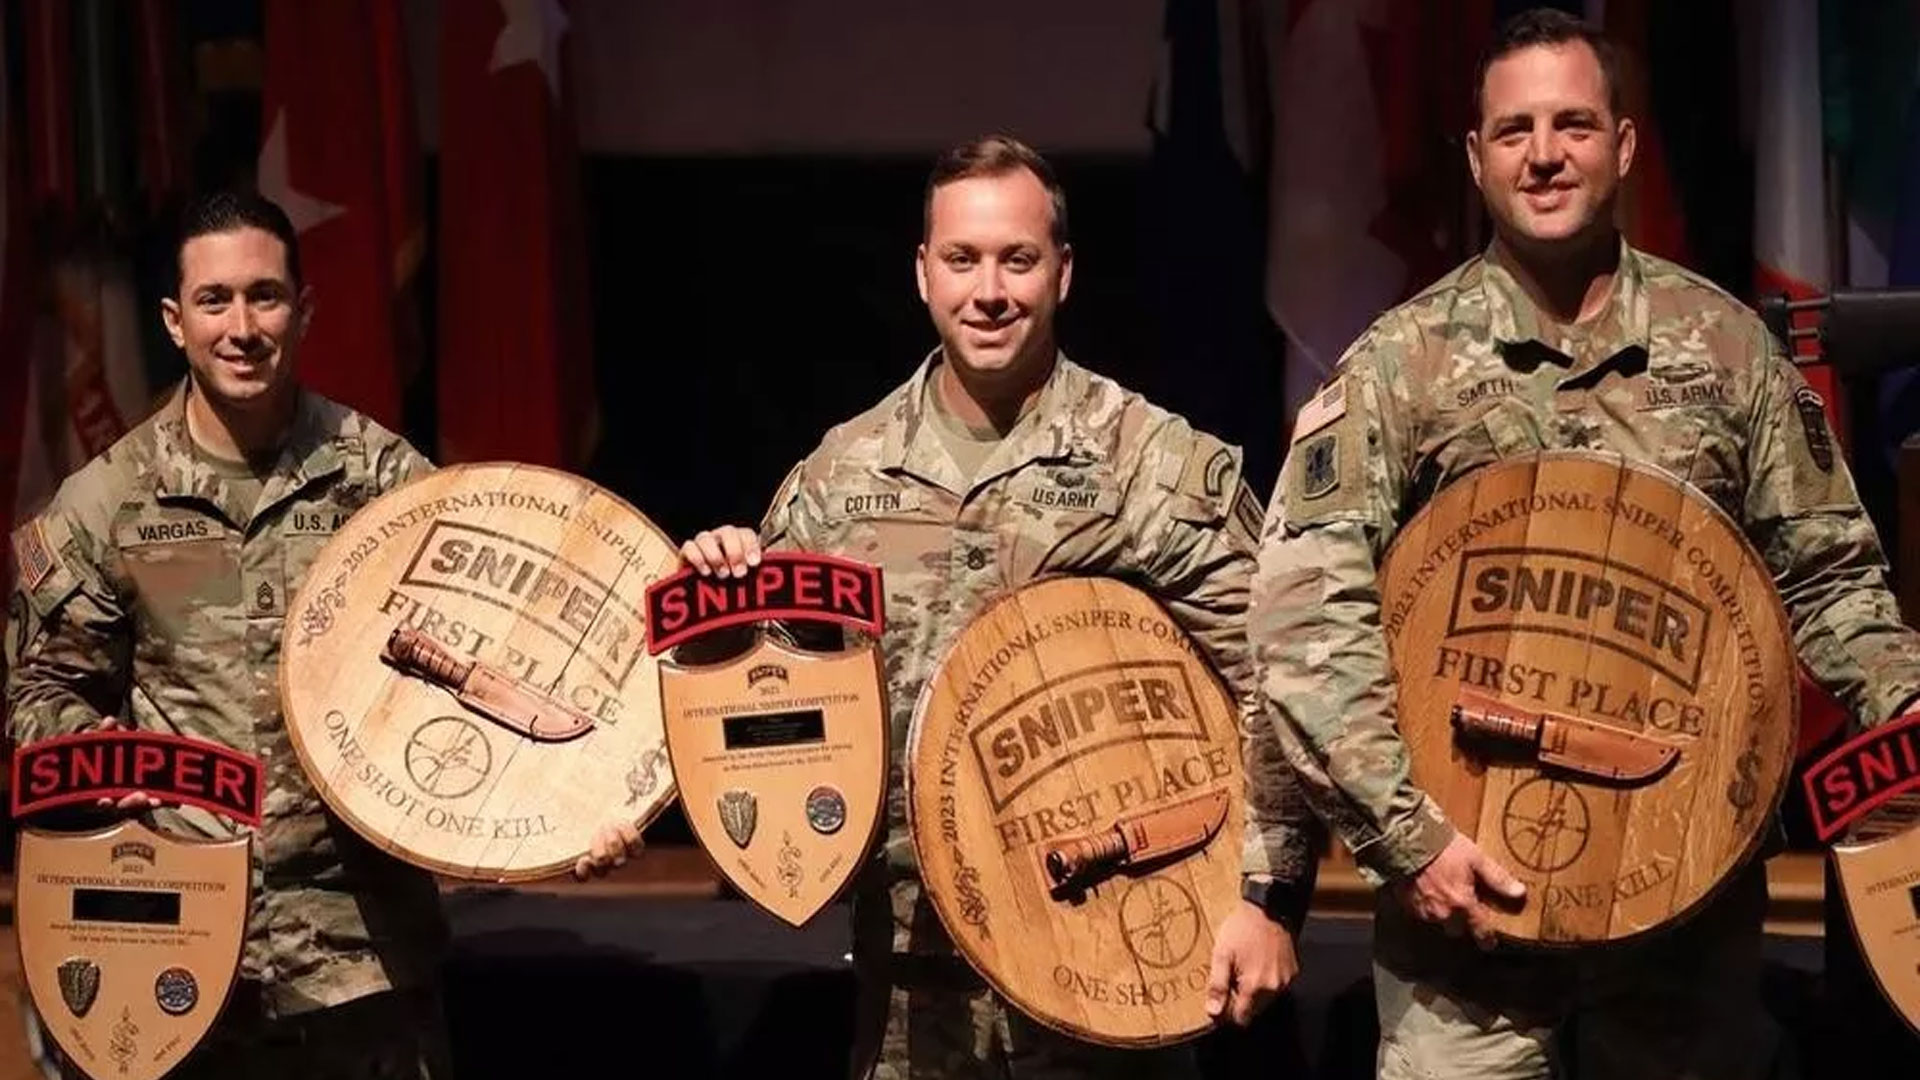 U.S. Army National Guard Wins International Sniper Competition...